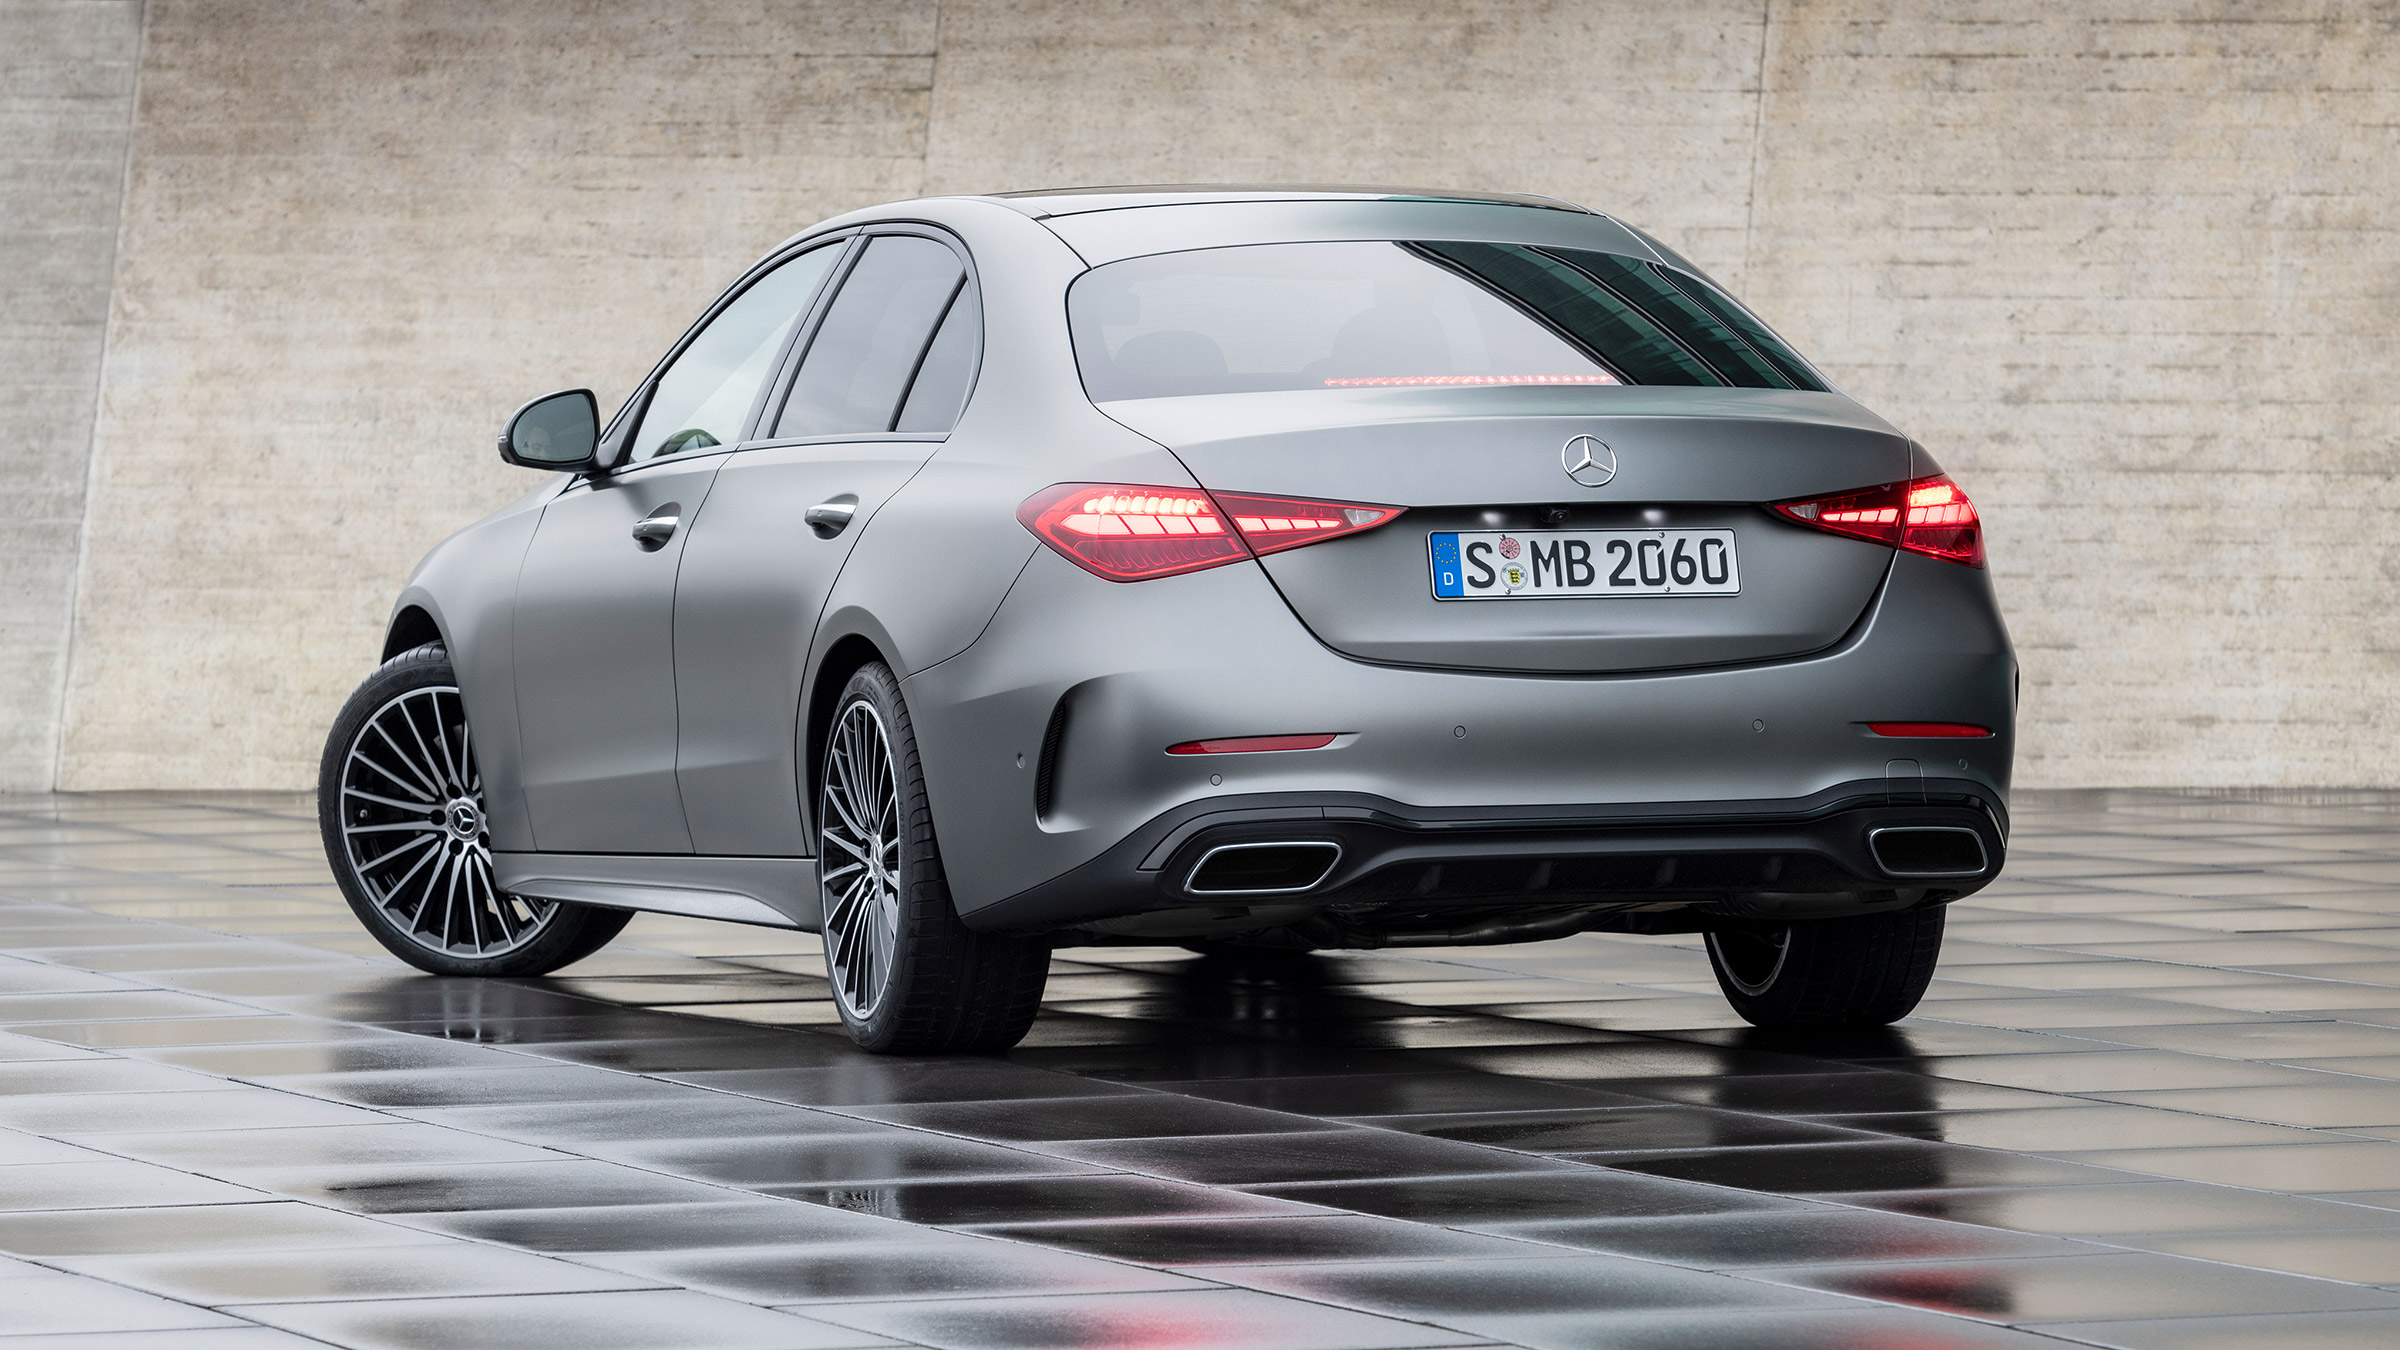 21 Mercedes C Class Revealed All New 3 Series Rival To Channel S Class Luxury Evo